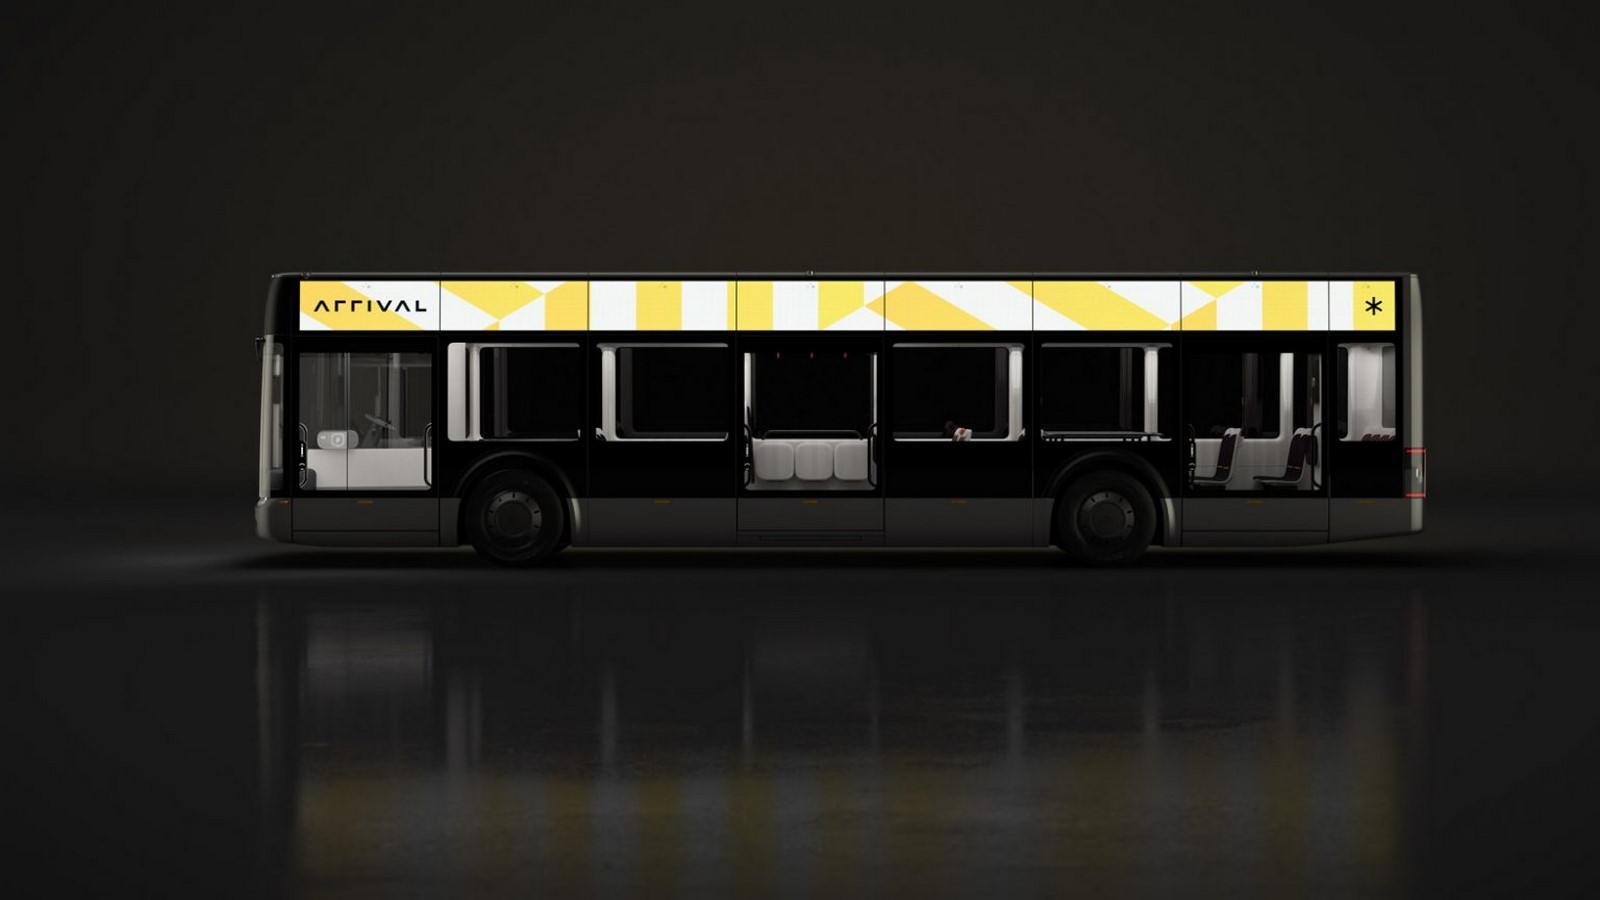 Arrival launches electric bus with features to help people travel safely following pandemic - Sheet4